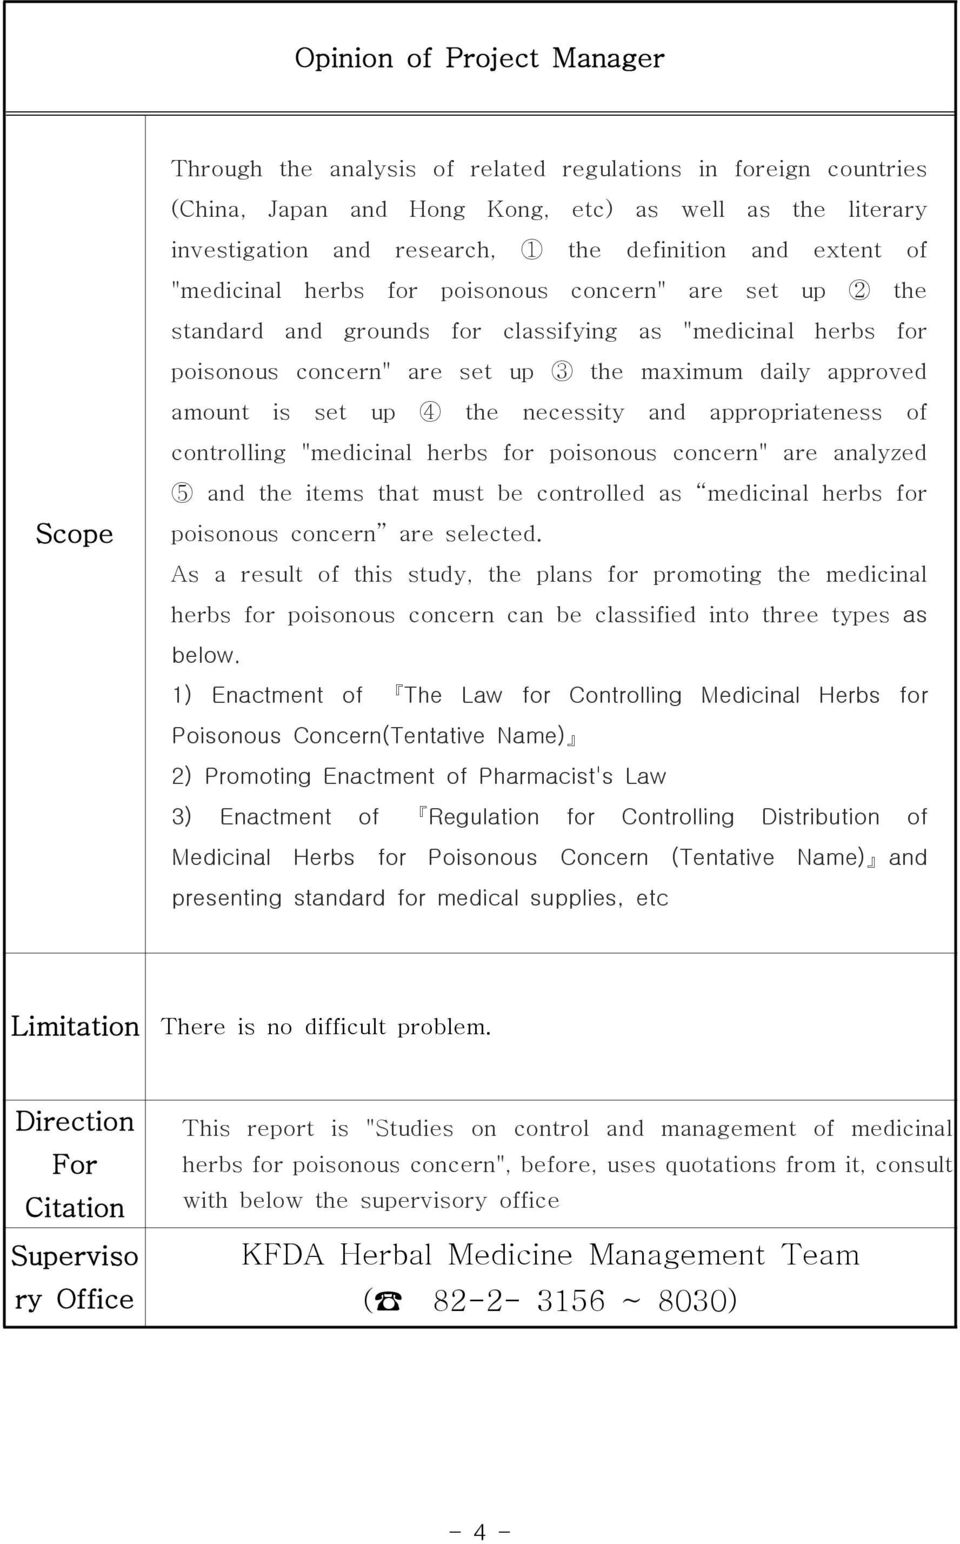 approved amount is set up 4 the necessity and appropriateness of controlling "medicinal herbs for poisonous concern" are analyzed 5 and the items that must be controlled as medicinal herbs for